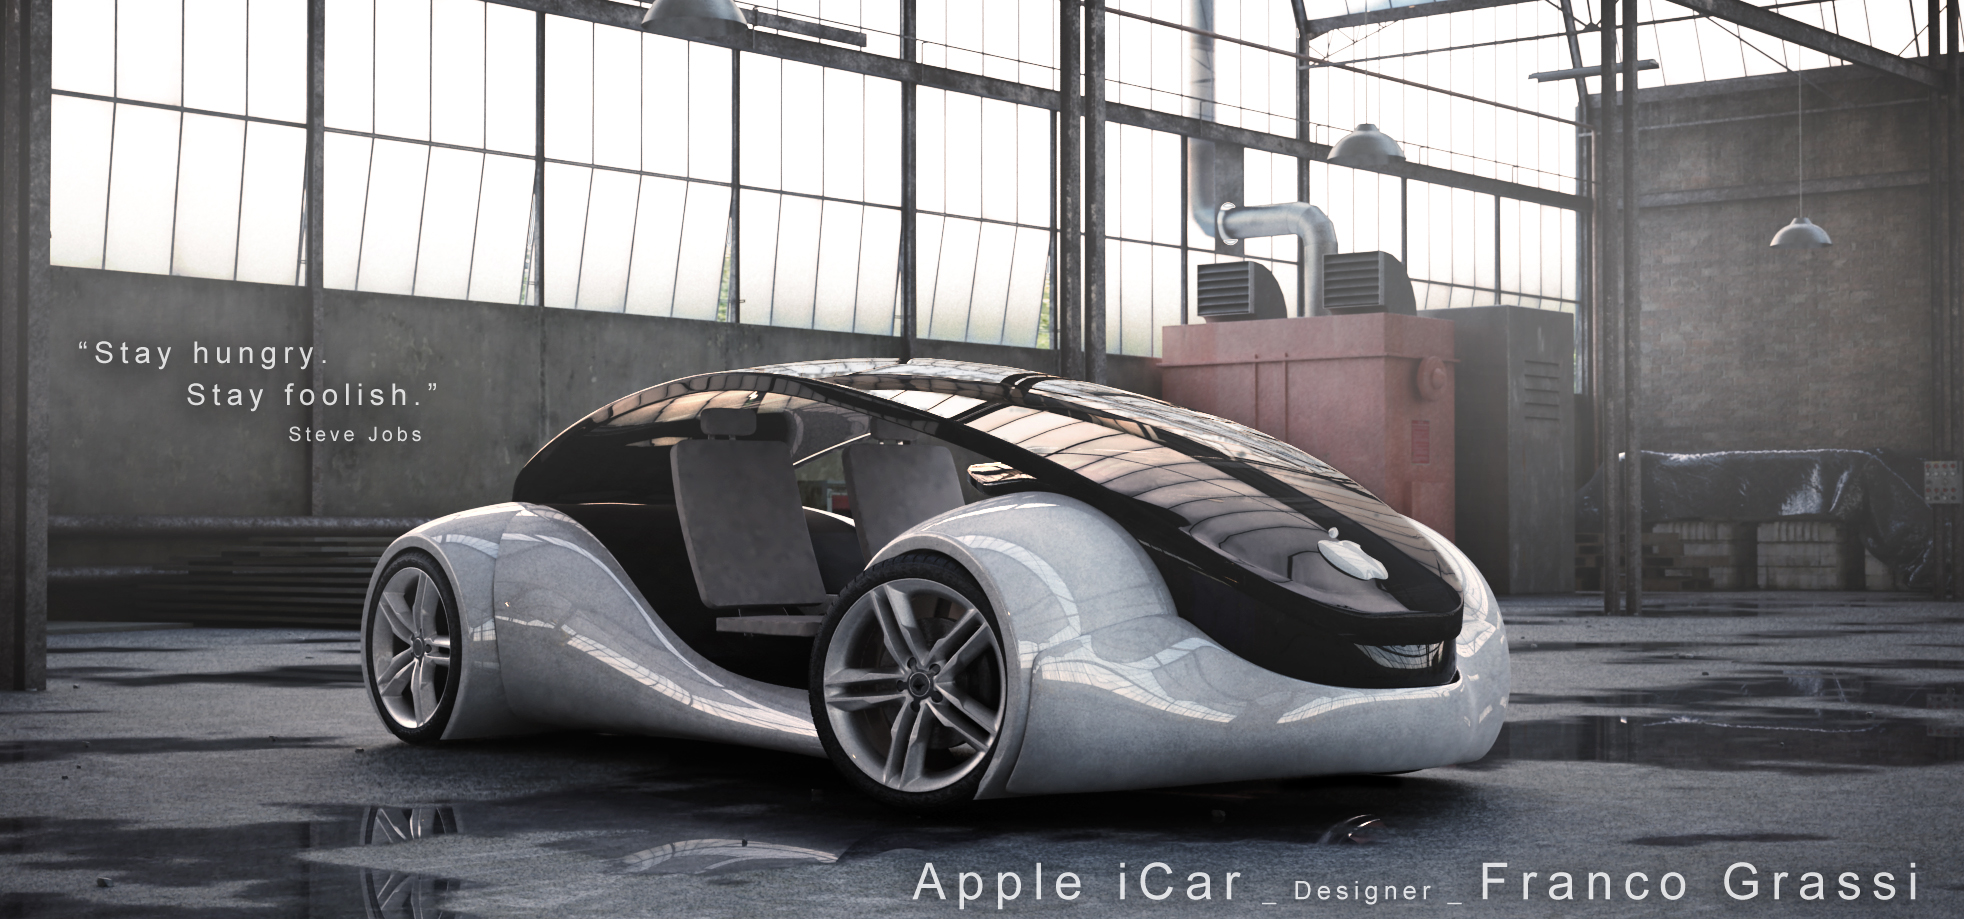 Apple iCar Concept, The Futuristic Electric Car From Apple